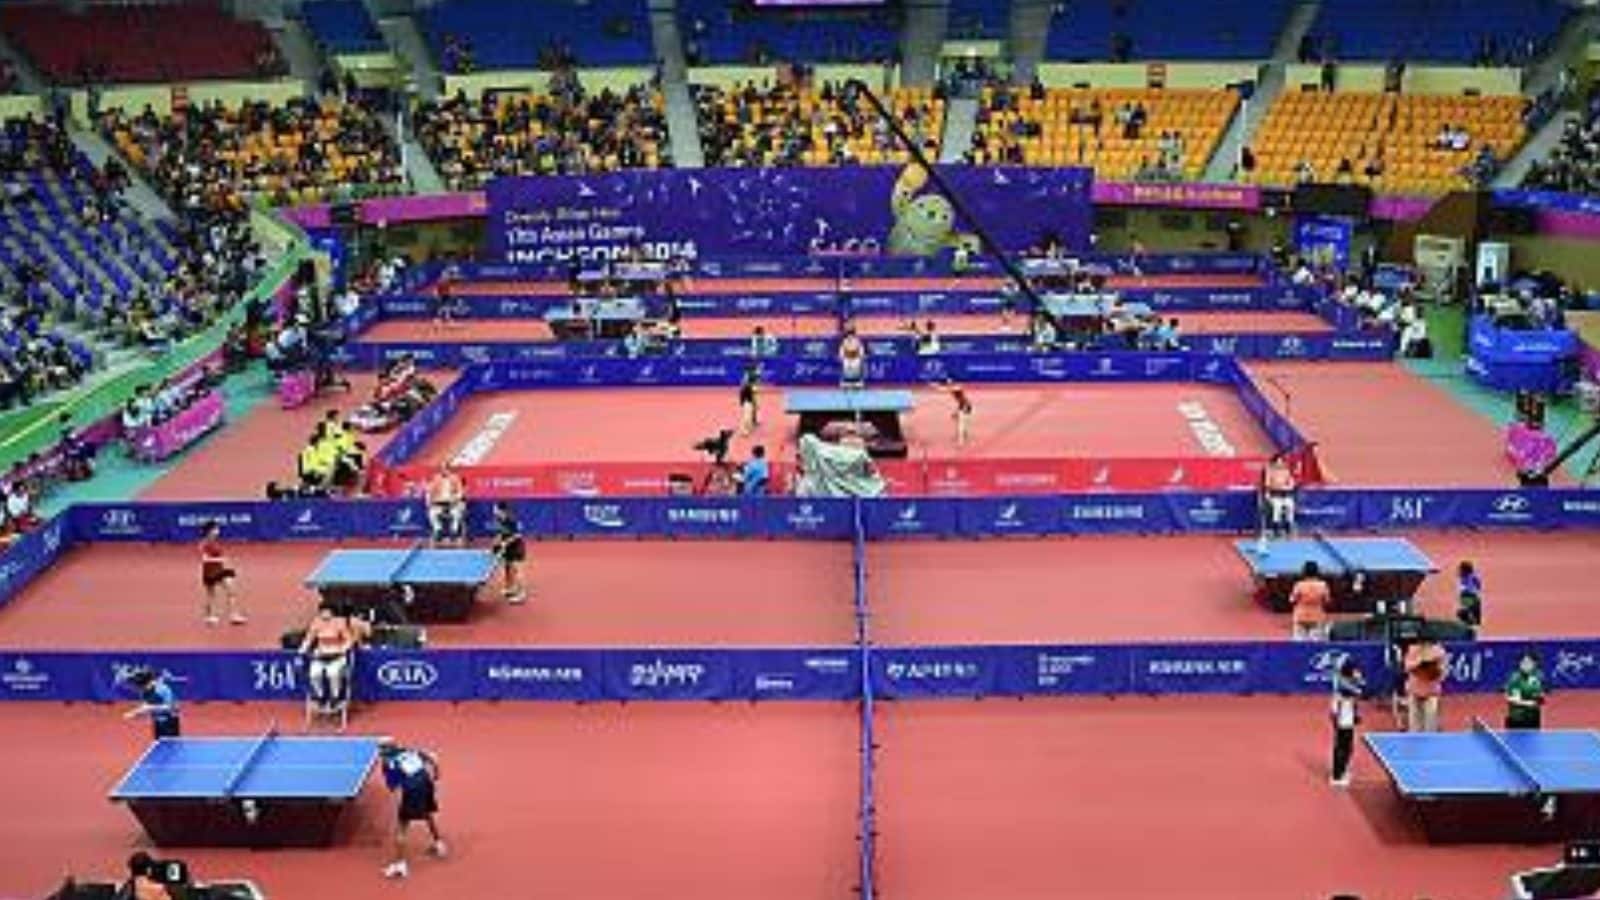 Host China Confirm Roster for Chengdu 2022 World Table Tennis